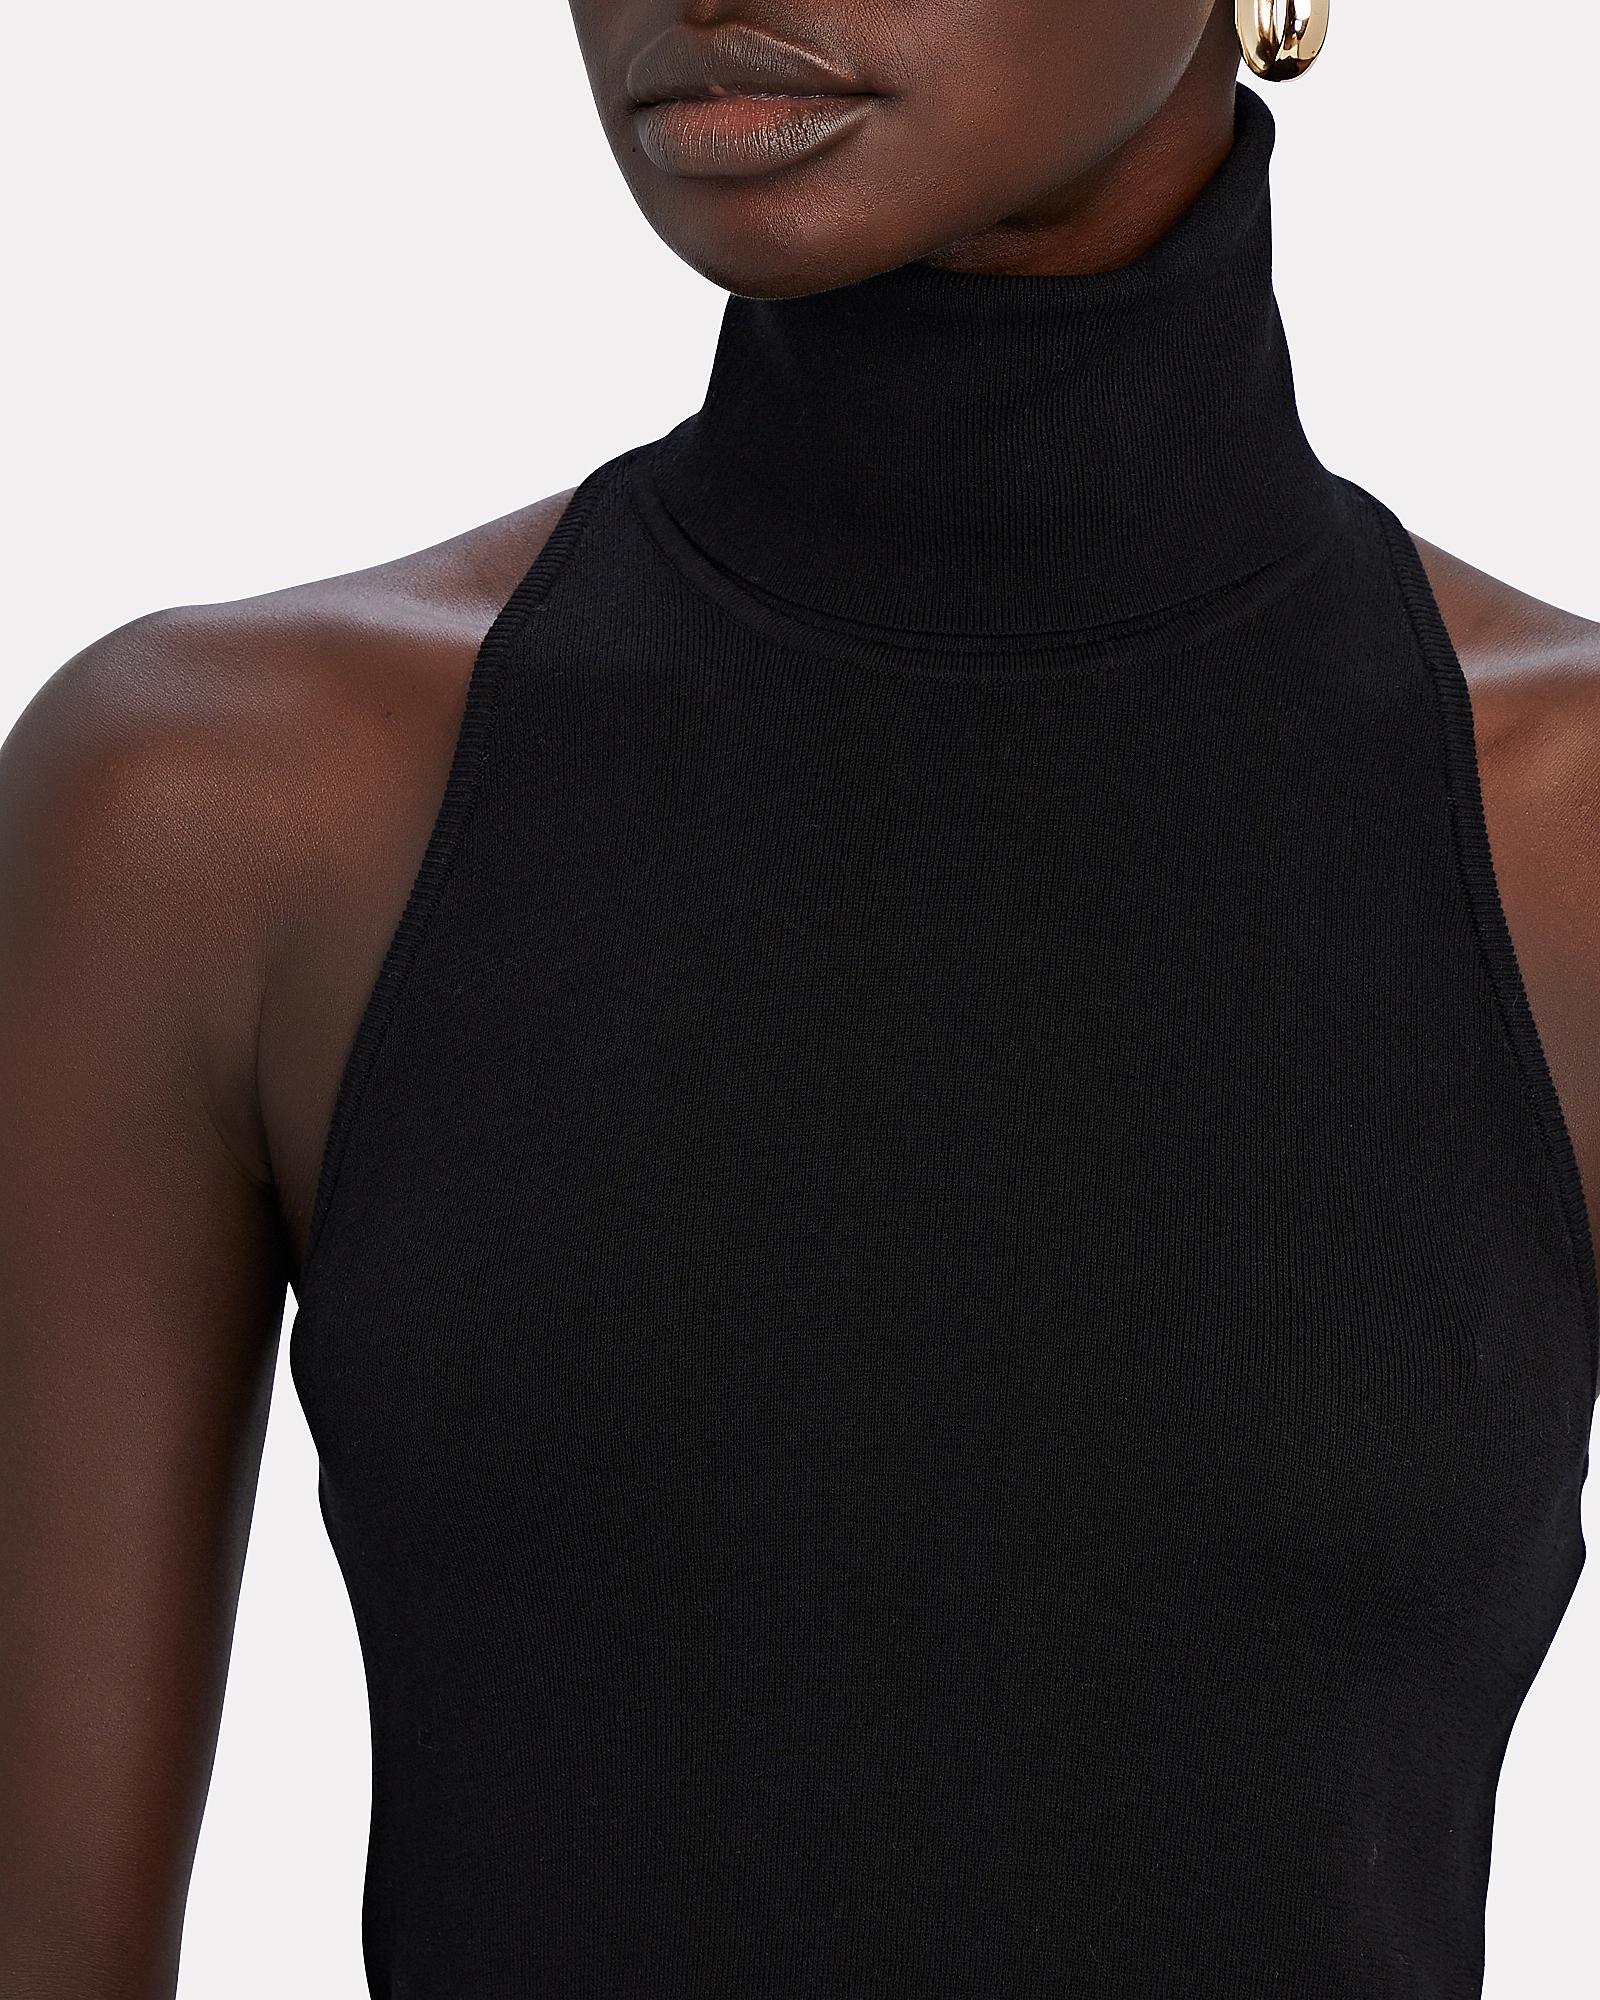 A.L.C. Cotton Paltrow Sleeveless Turtleneck Top in Black - Lyst